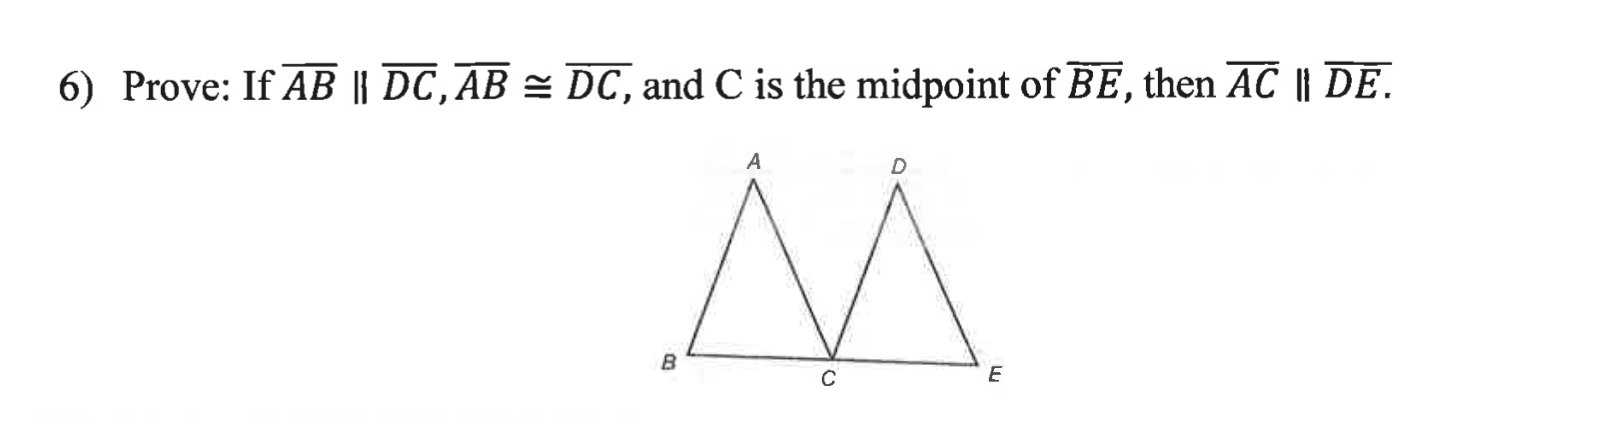 6) Prove: If AB || DC,AB = DC, and C is the midpoint of BE, then AC || DE.
